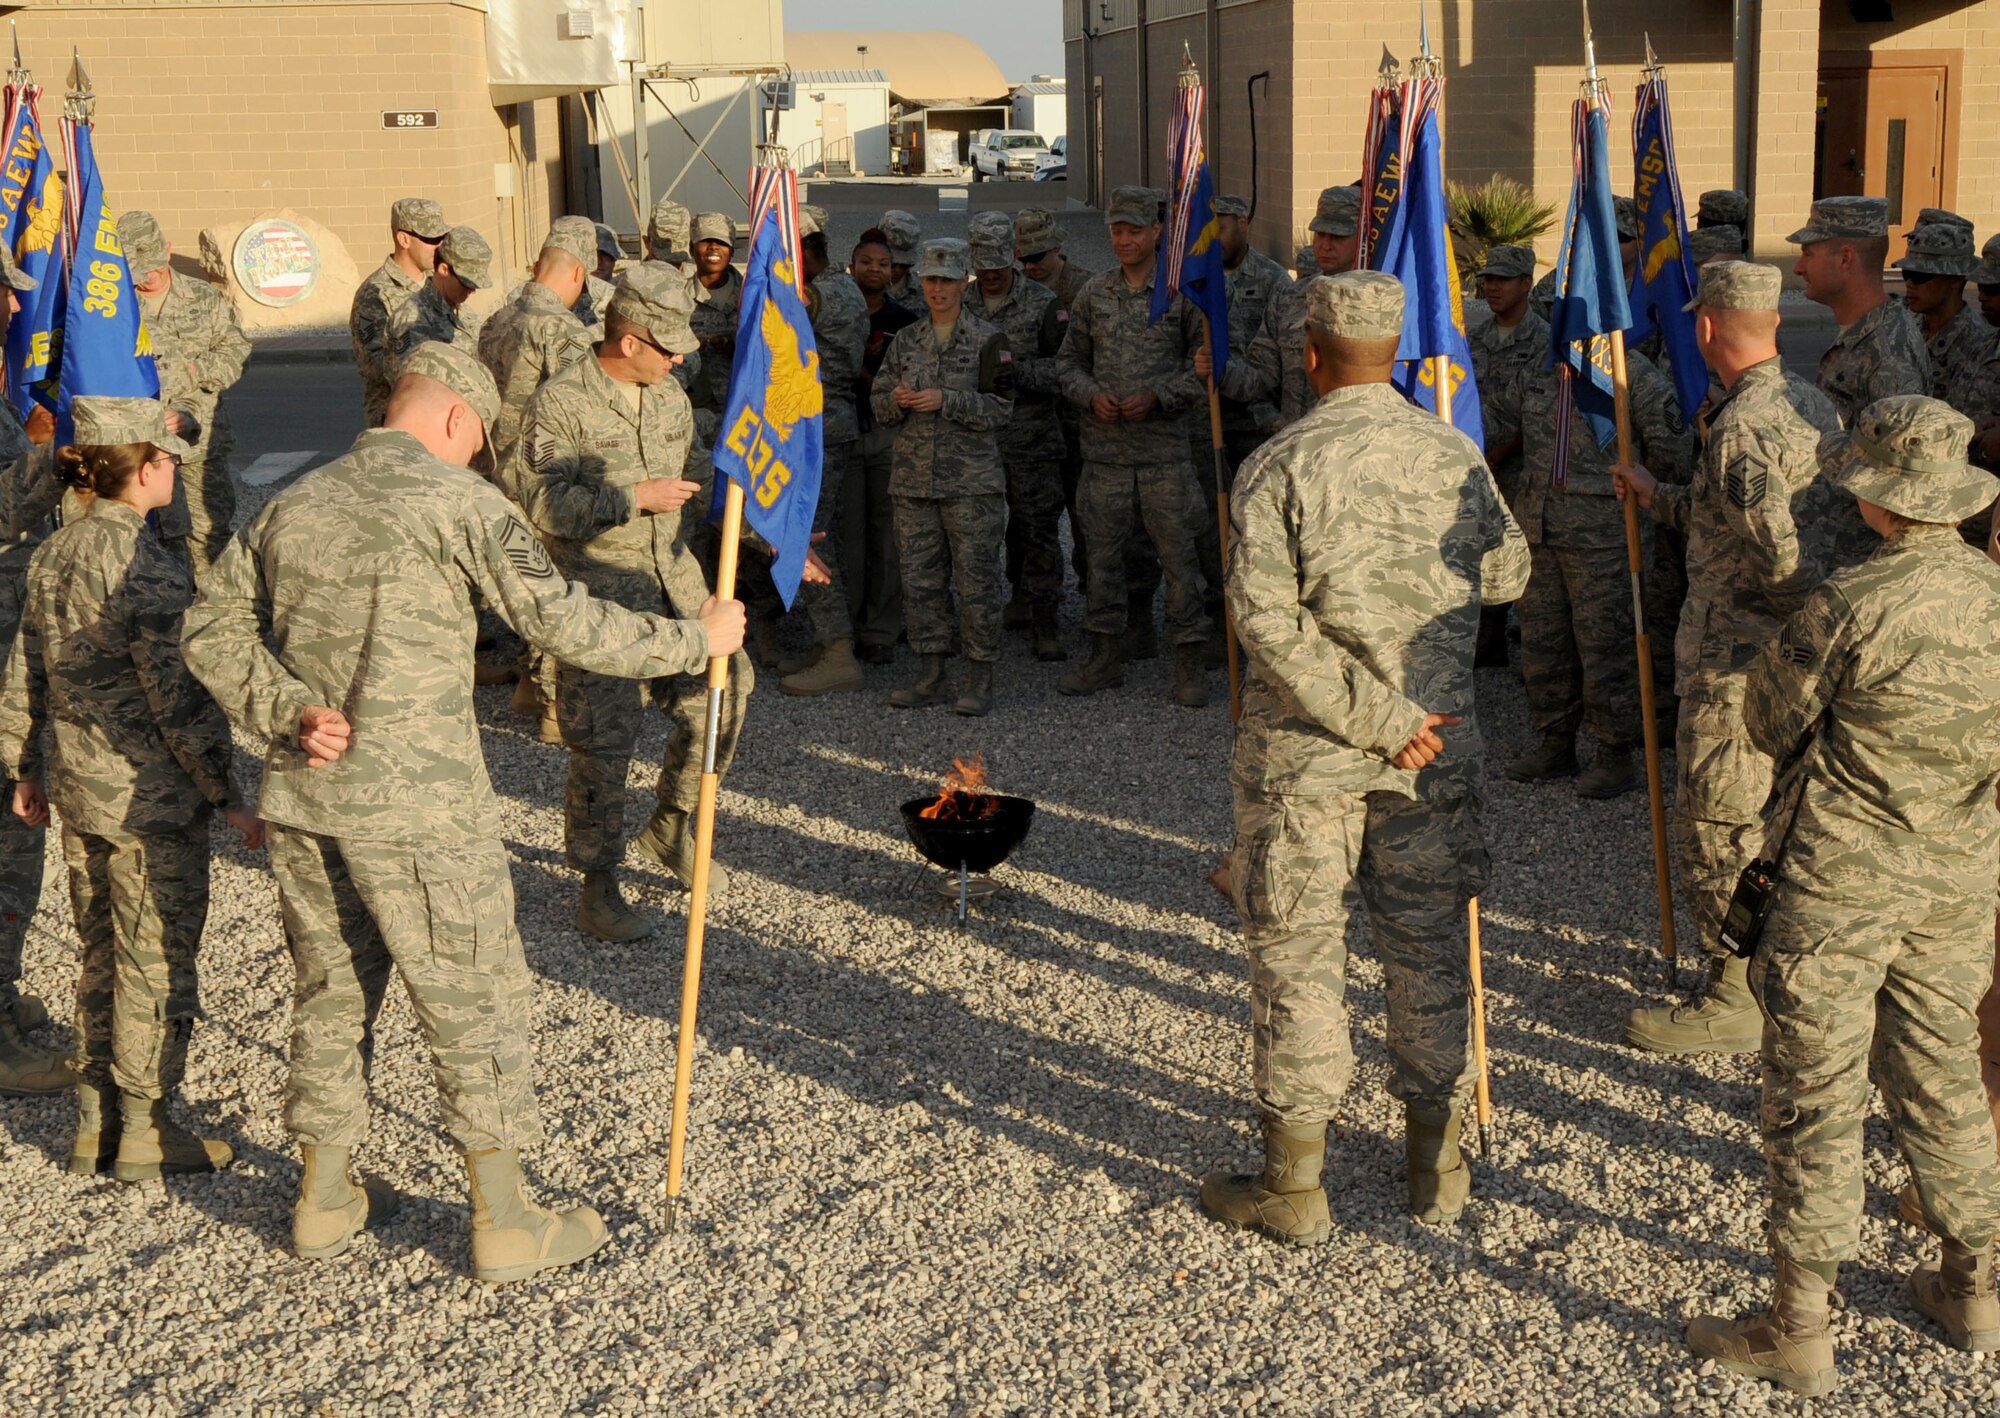 Master Sgt. Eddie Savage (center), 386th Expeditionary Operations Group first sergeant, explains the purpose and meaning of a peace fire ritual during a Native American Heritage Month observance ceremony here Nov. 5, 2014. This year’s Native American Heritage Month theme is, “Native Pride and Spirit: Yesterday, Today and Forever,” and the observance promotes the value of Native American ancestry and traditions. (U.S. Air Force photo by Master Sgt. Eric Petosky/released)